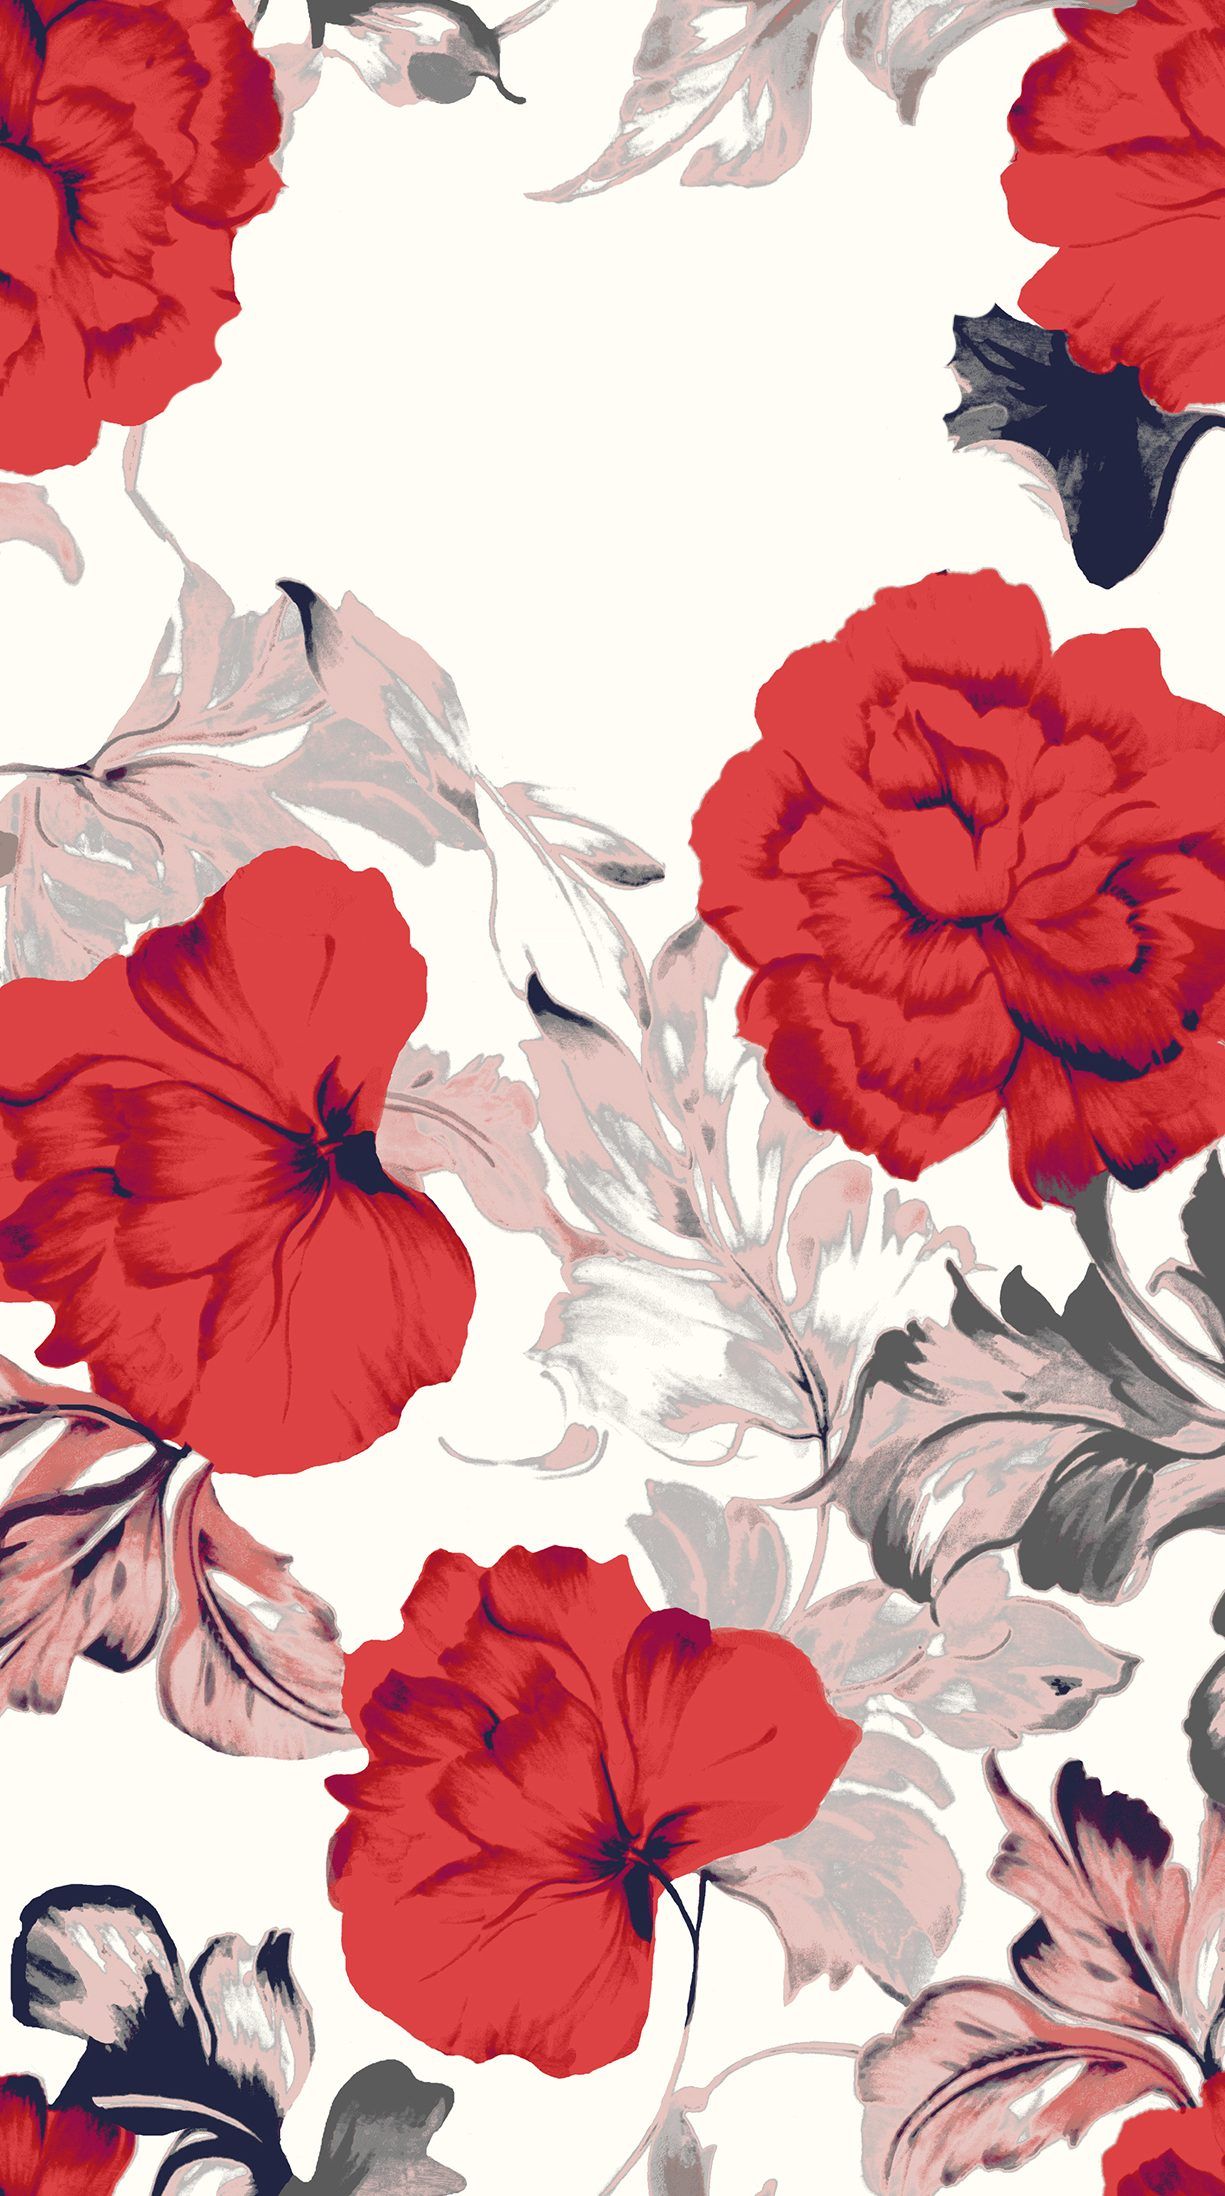 Floral Background Ideas. Download Free Background Image, Floral Background Hearing about the. Floral wallpaper iphone, Flower wallpaper, Floral wallpaper